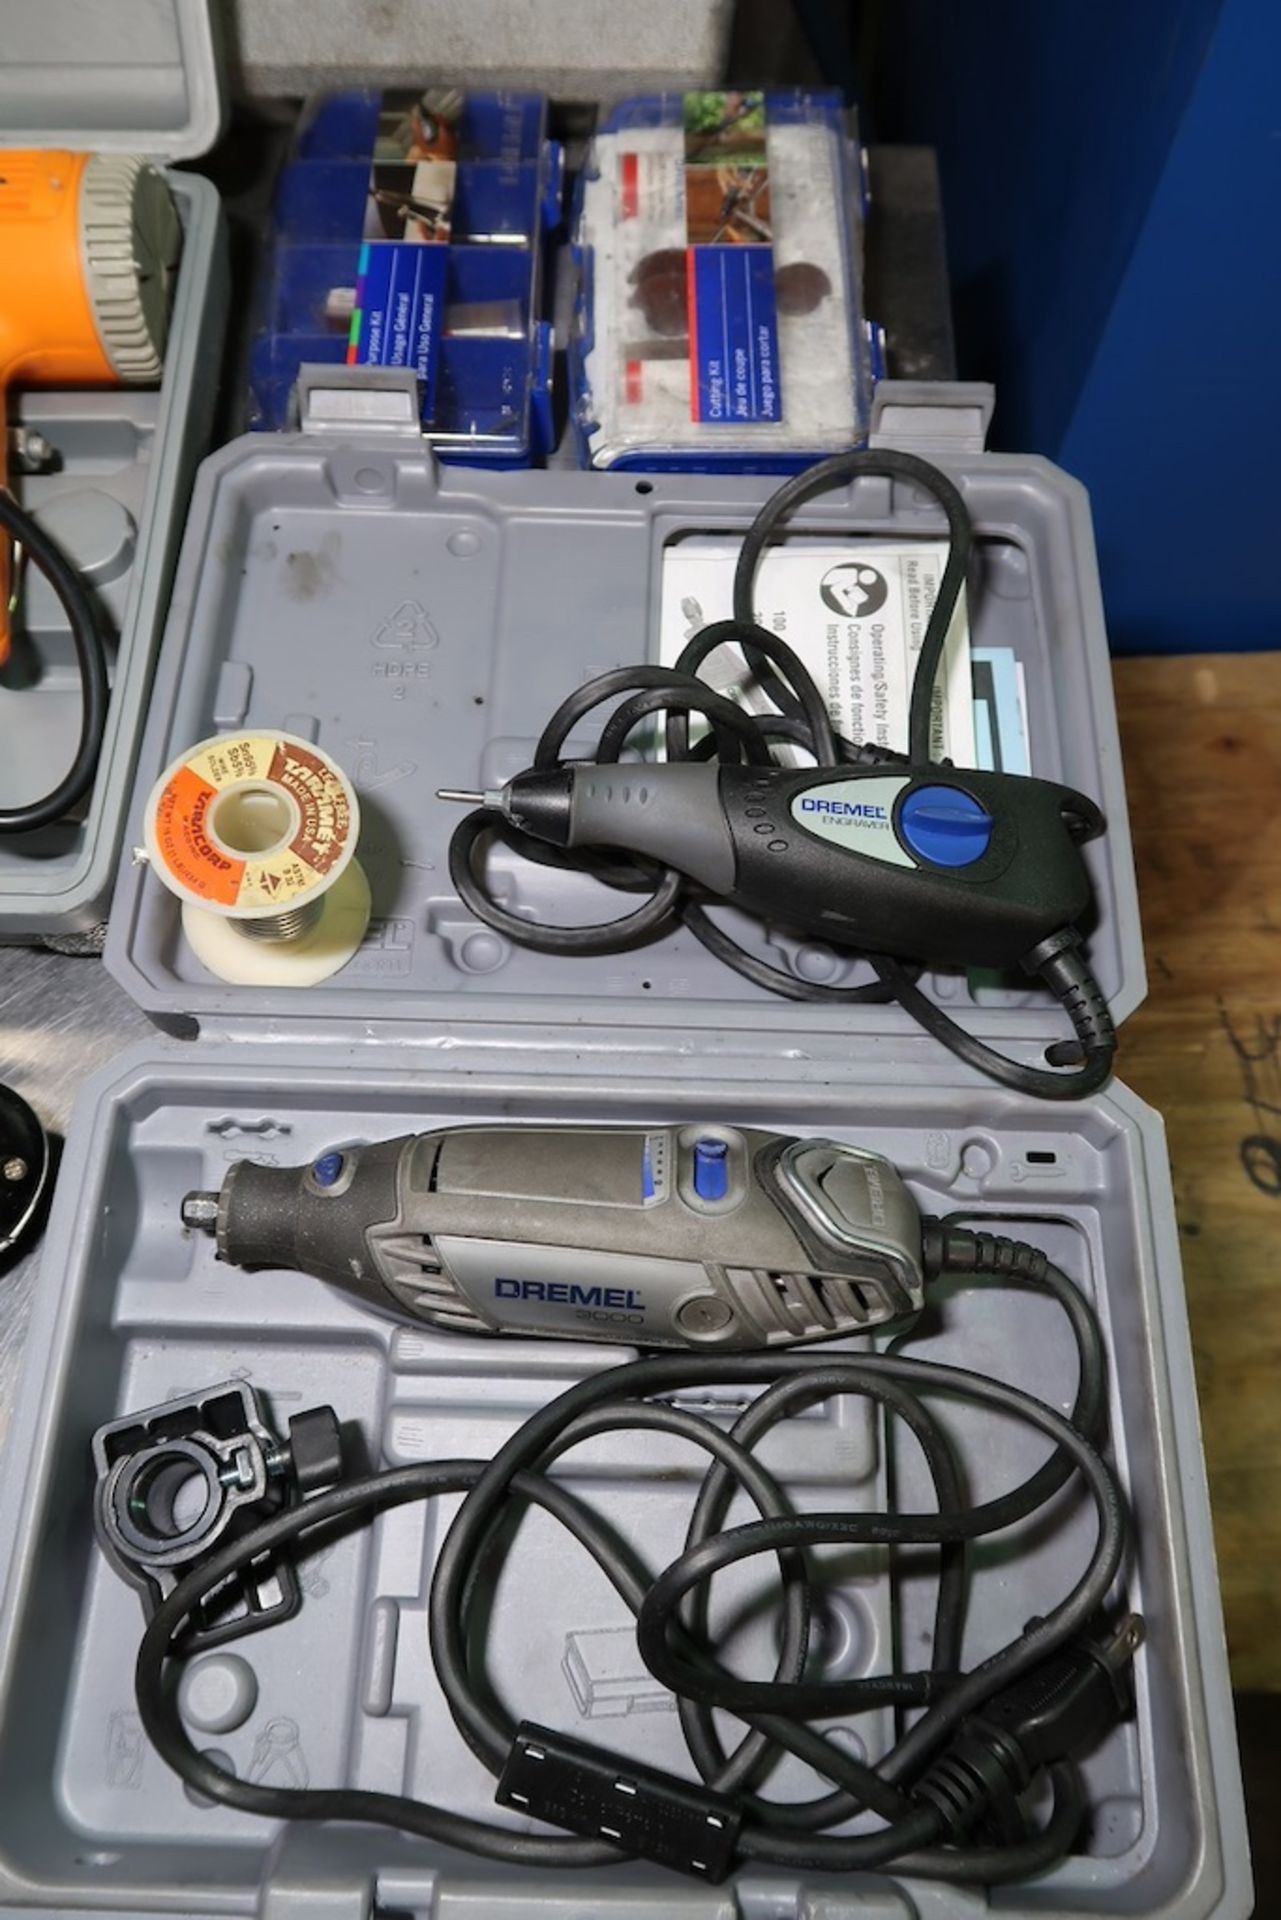 Dremel 3000 Electric Rotary Tool with (1) Dremel Engraver, Etc. - Image 3 of 3